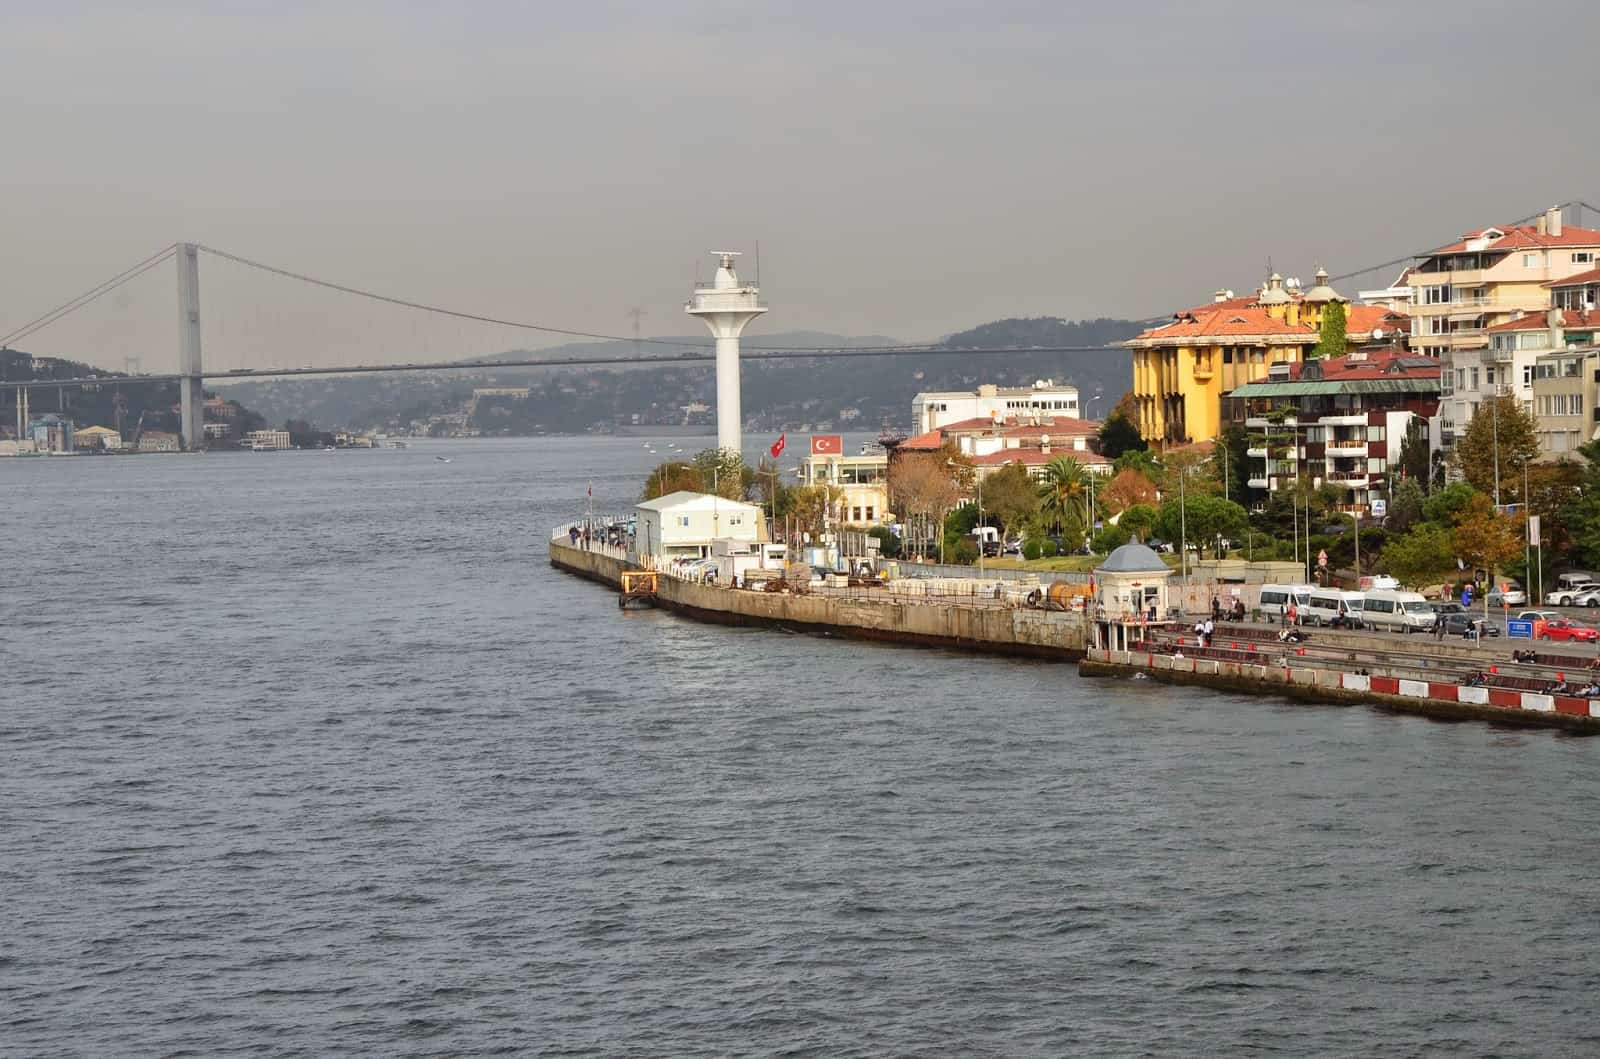 View to the north from Maiden's Tower in Üsküdar, Istanbul, Turkey